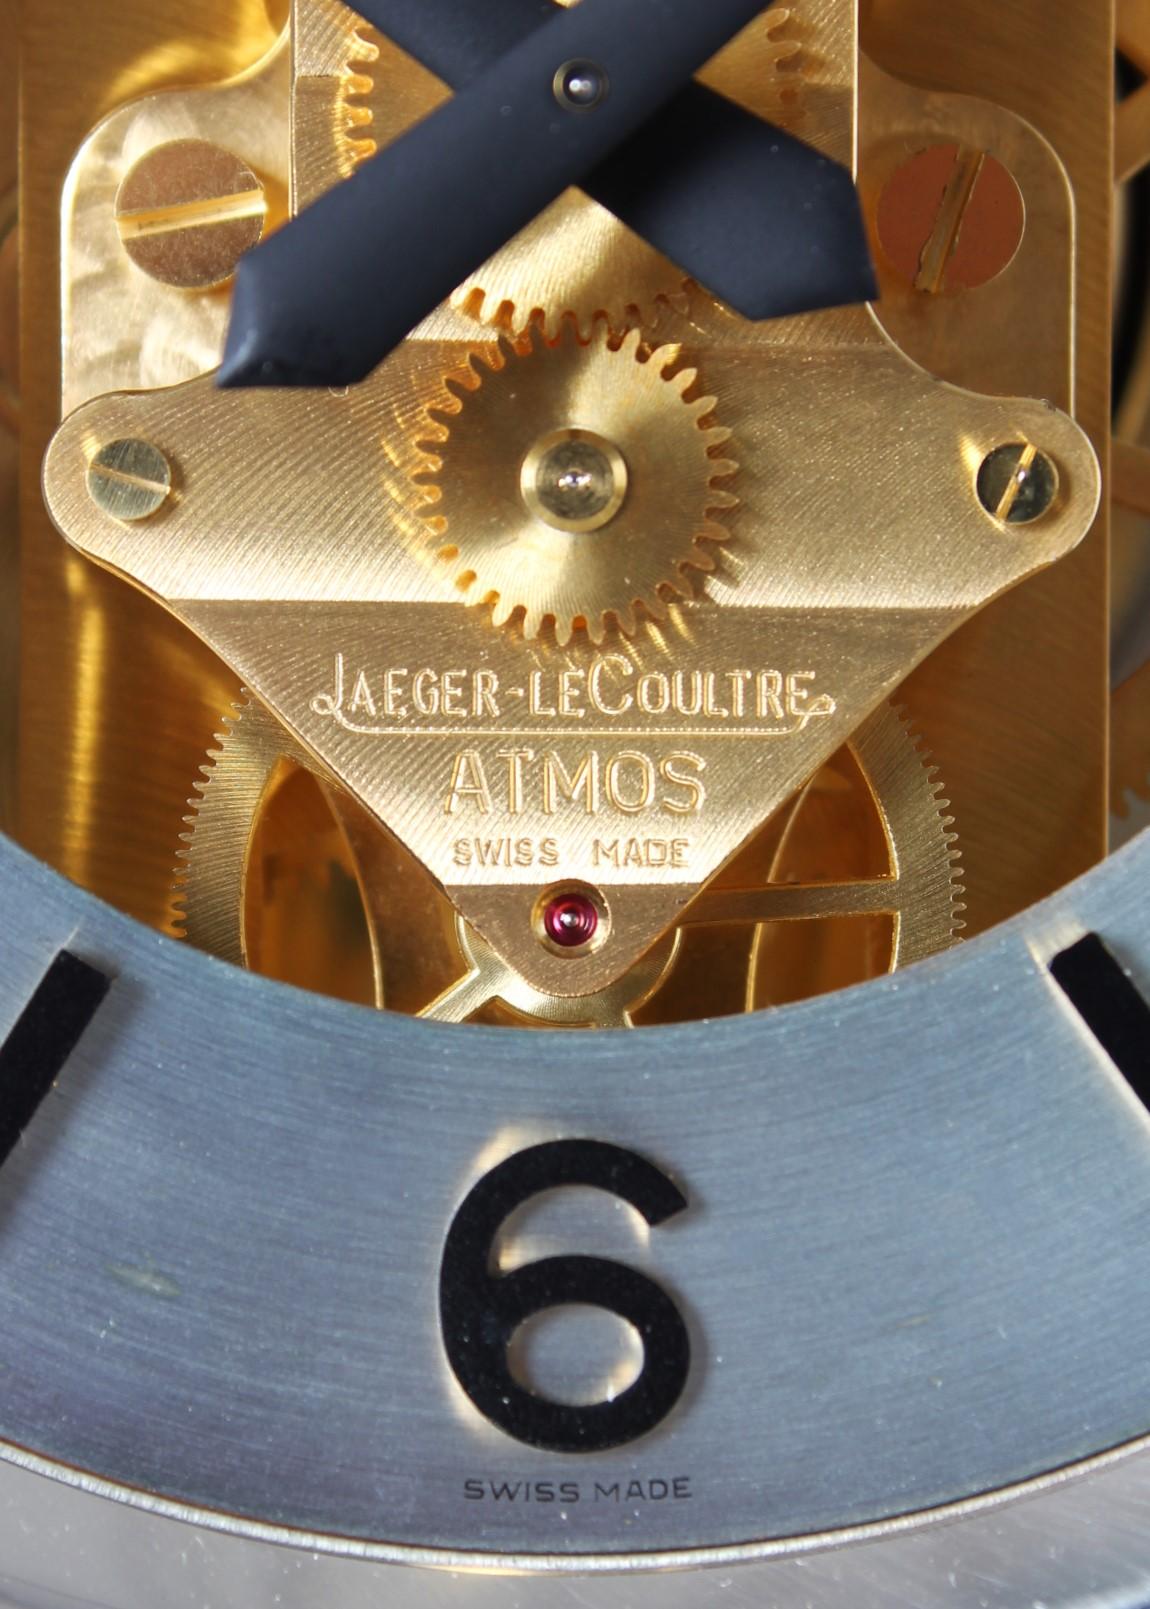 Swiss Jaeger LeCoultre, Bicolor Atmos Clock, Silver and Gold, Manufactured 1978 For Sale